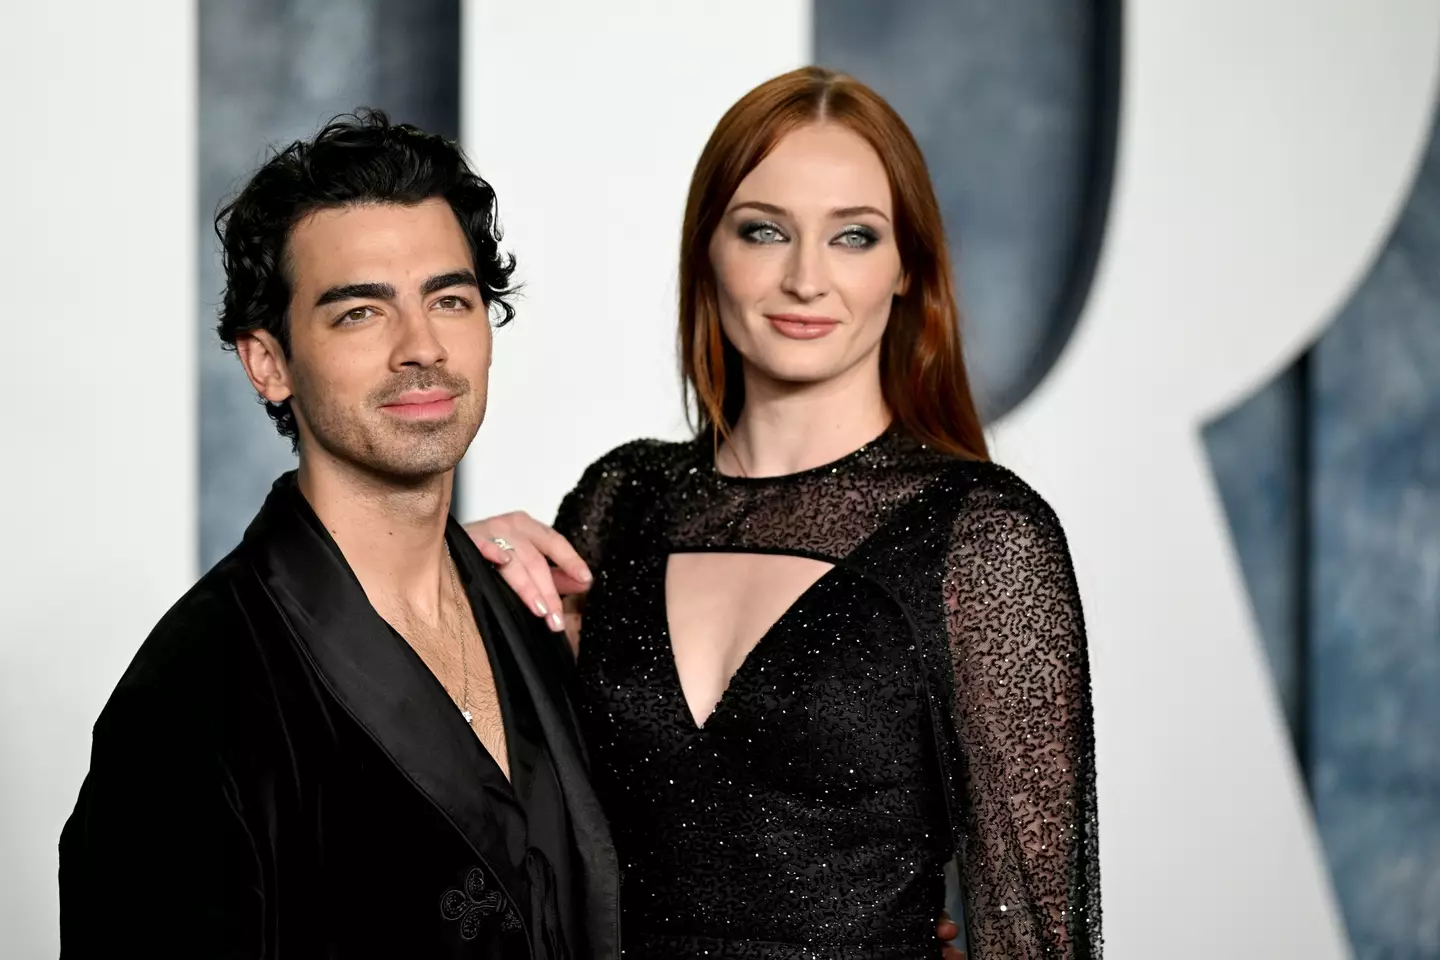 Jessica Chastain has supported Sophie Turner after suing her estranged husband Joe Jonas.